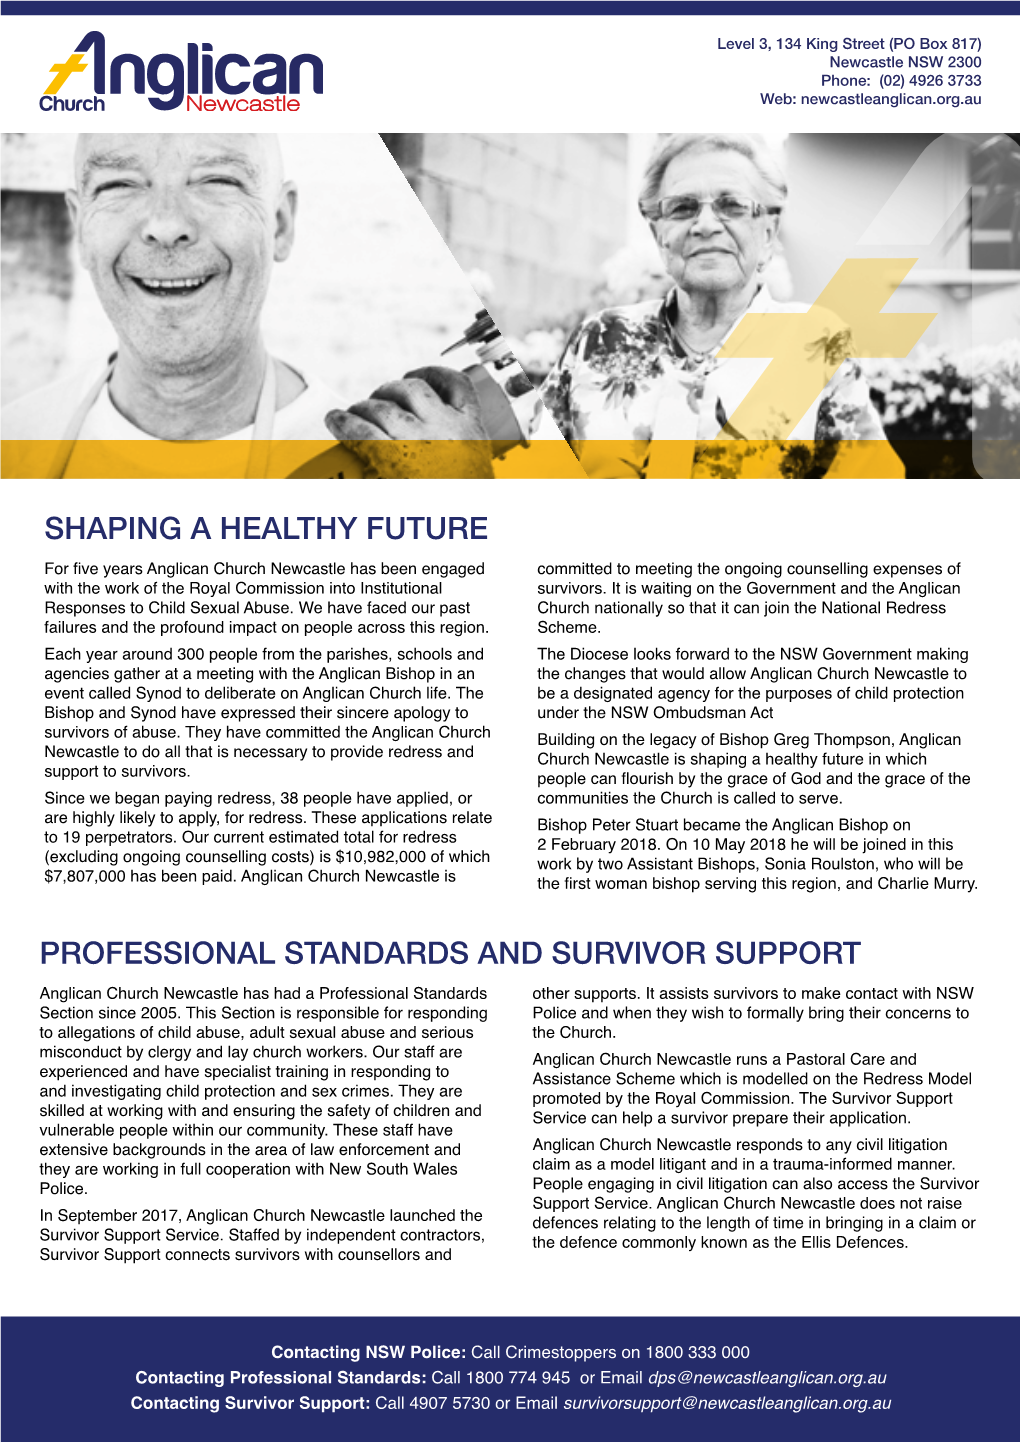 Shaping a Healthy Future Professional Standards